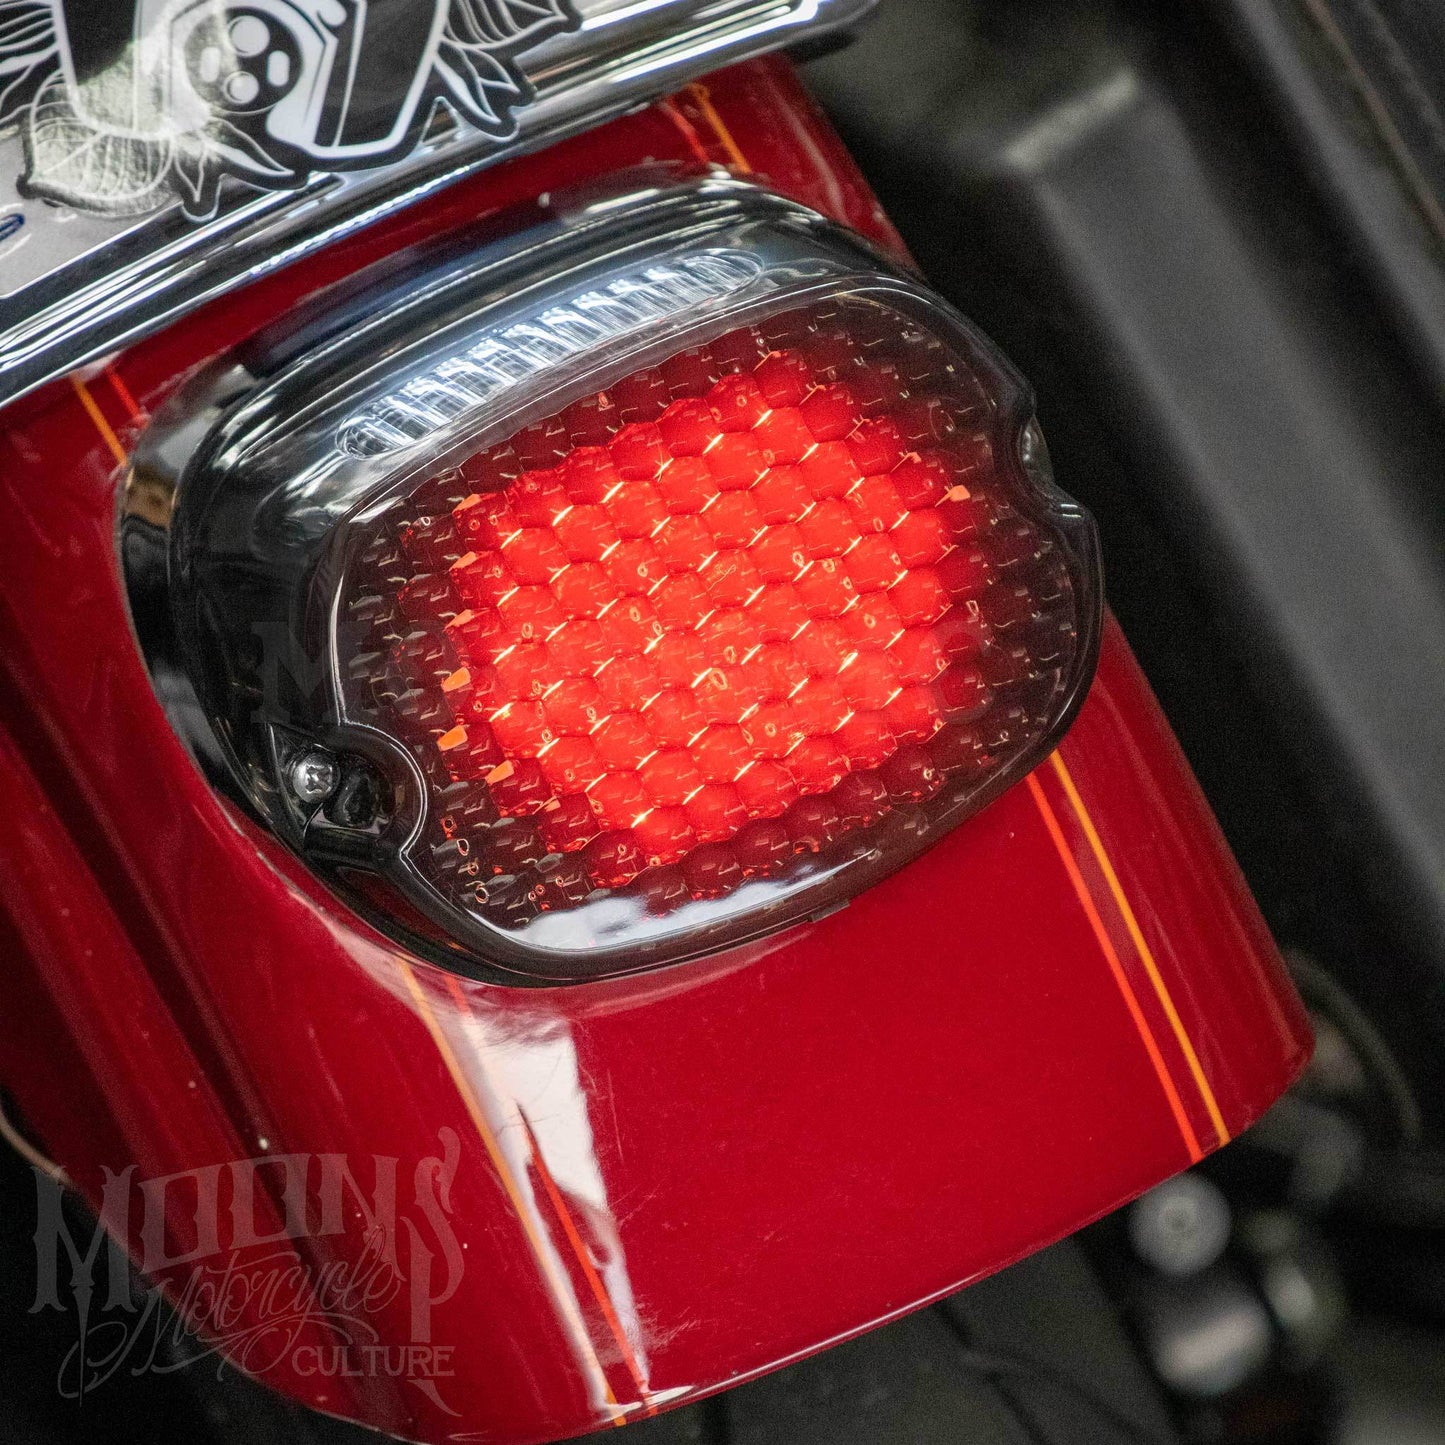 MOONSMC® FXR Low Profile LED Tail light, Lighting, MOONS, MOONSMC® // Moons Motorcycle Culture